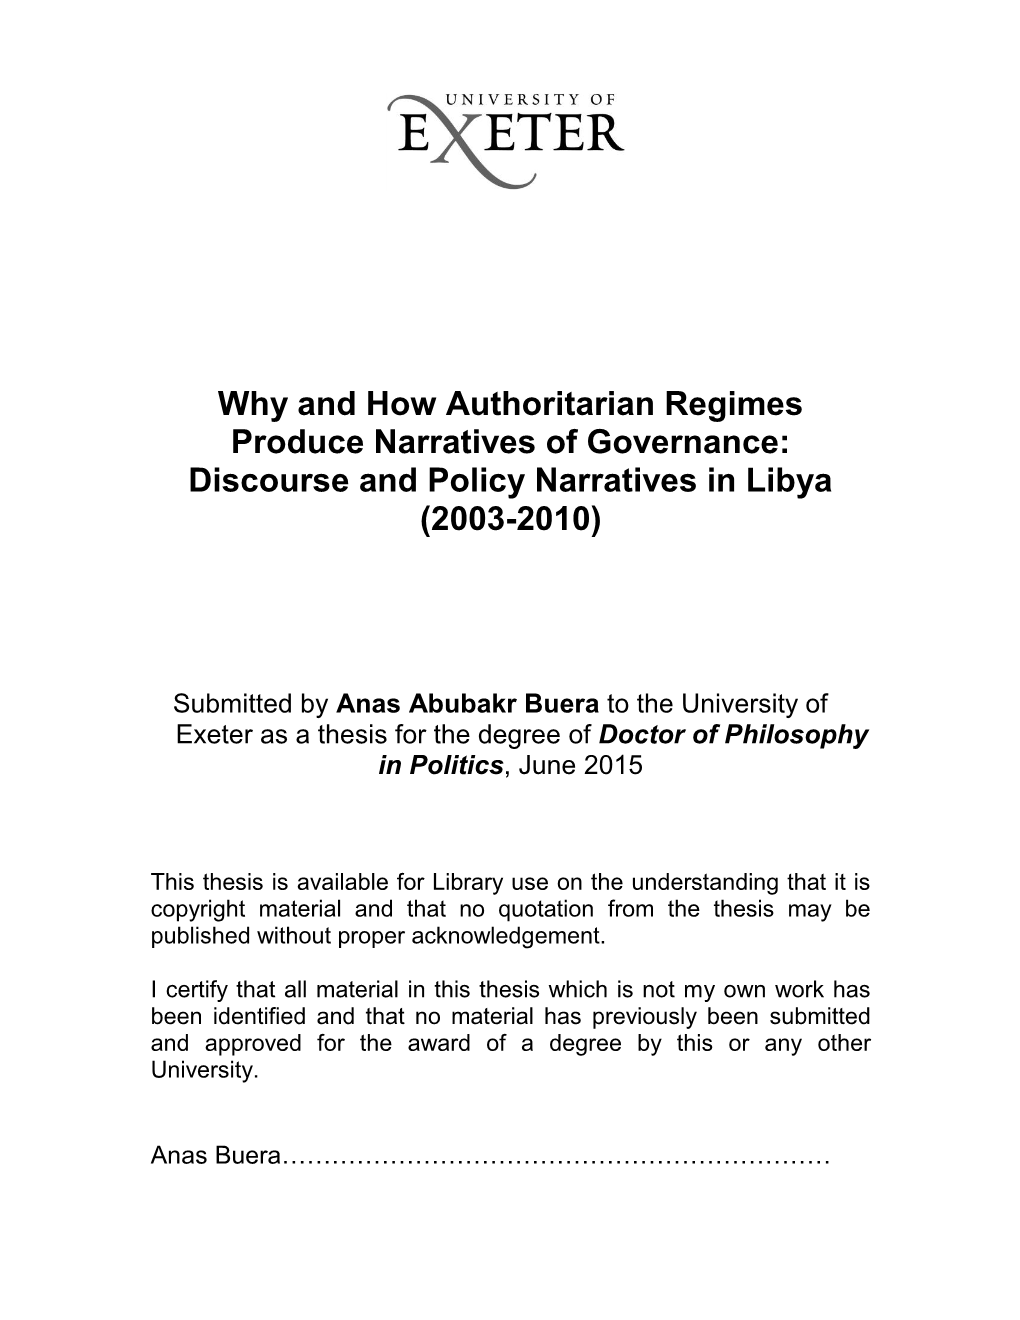 Why and How Authoritarian Regimes Produce Narratives of Governance: Discourse and Policy Narratives in Libya (2003-2010)